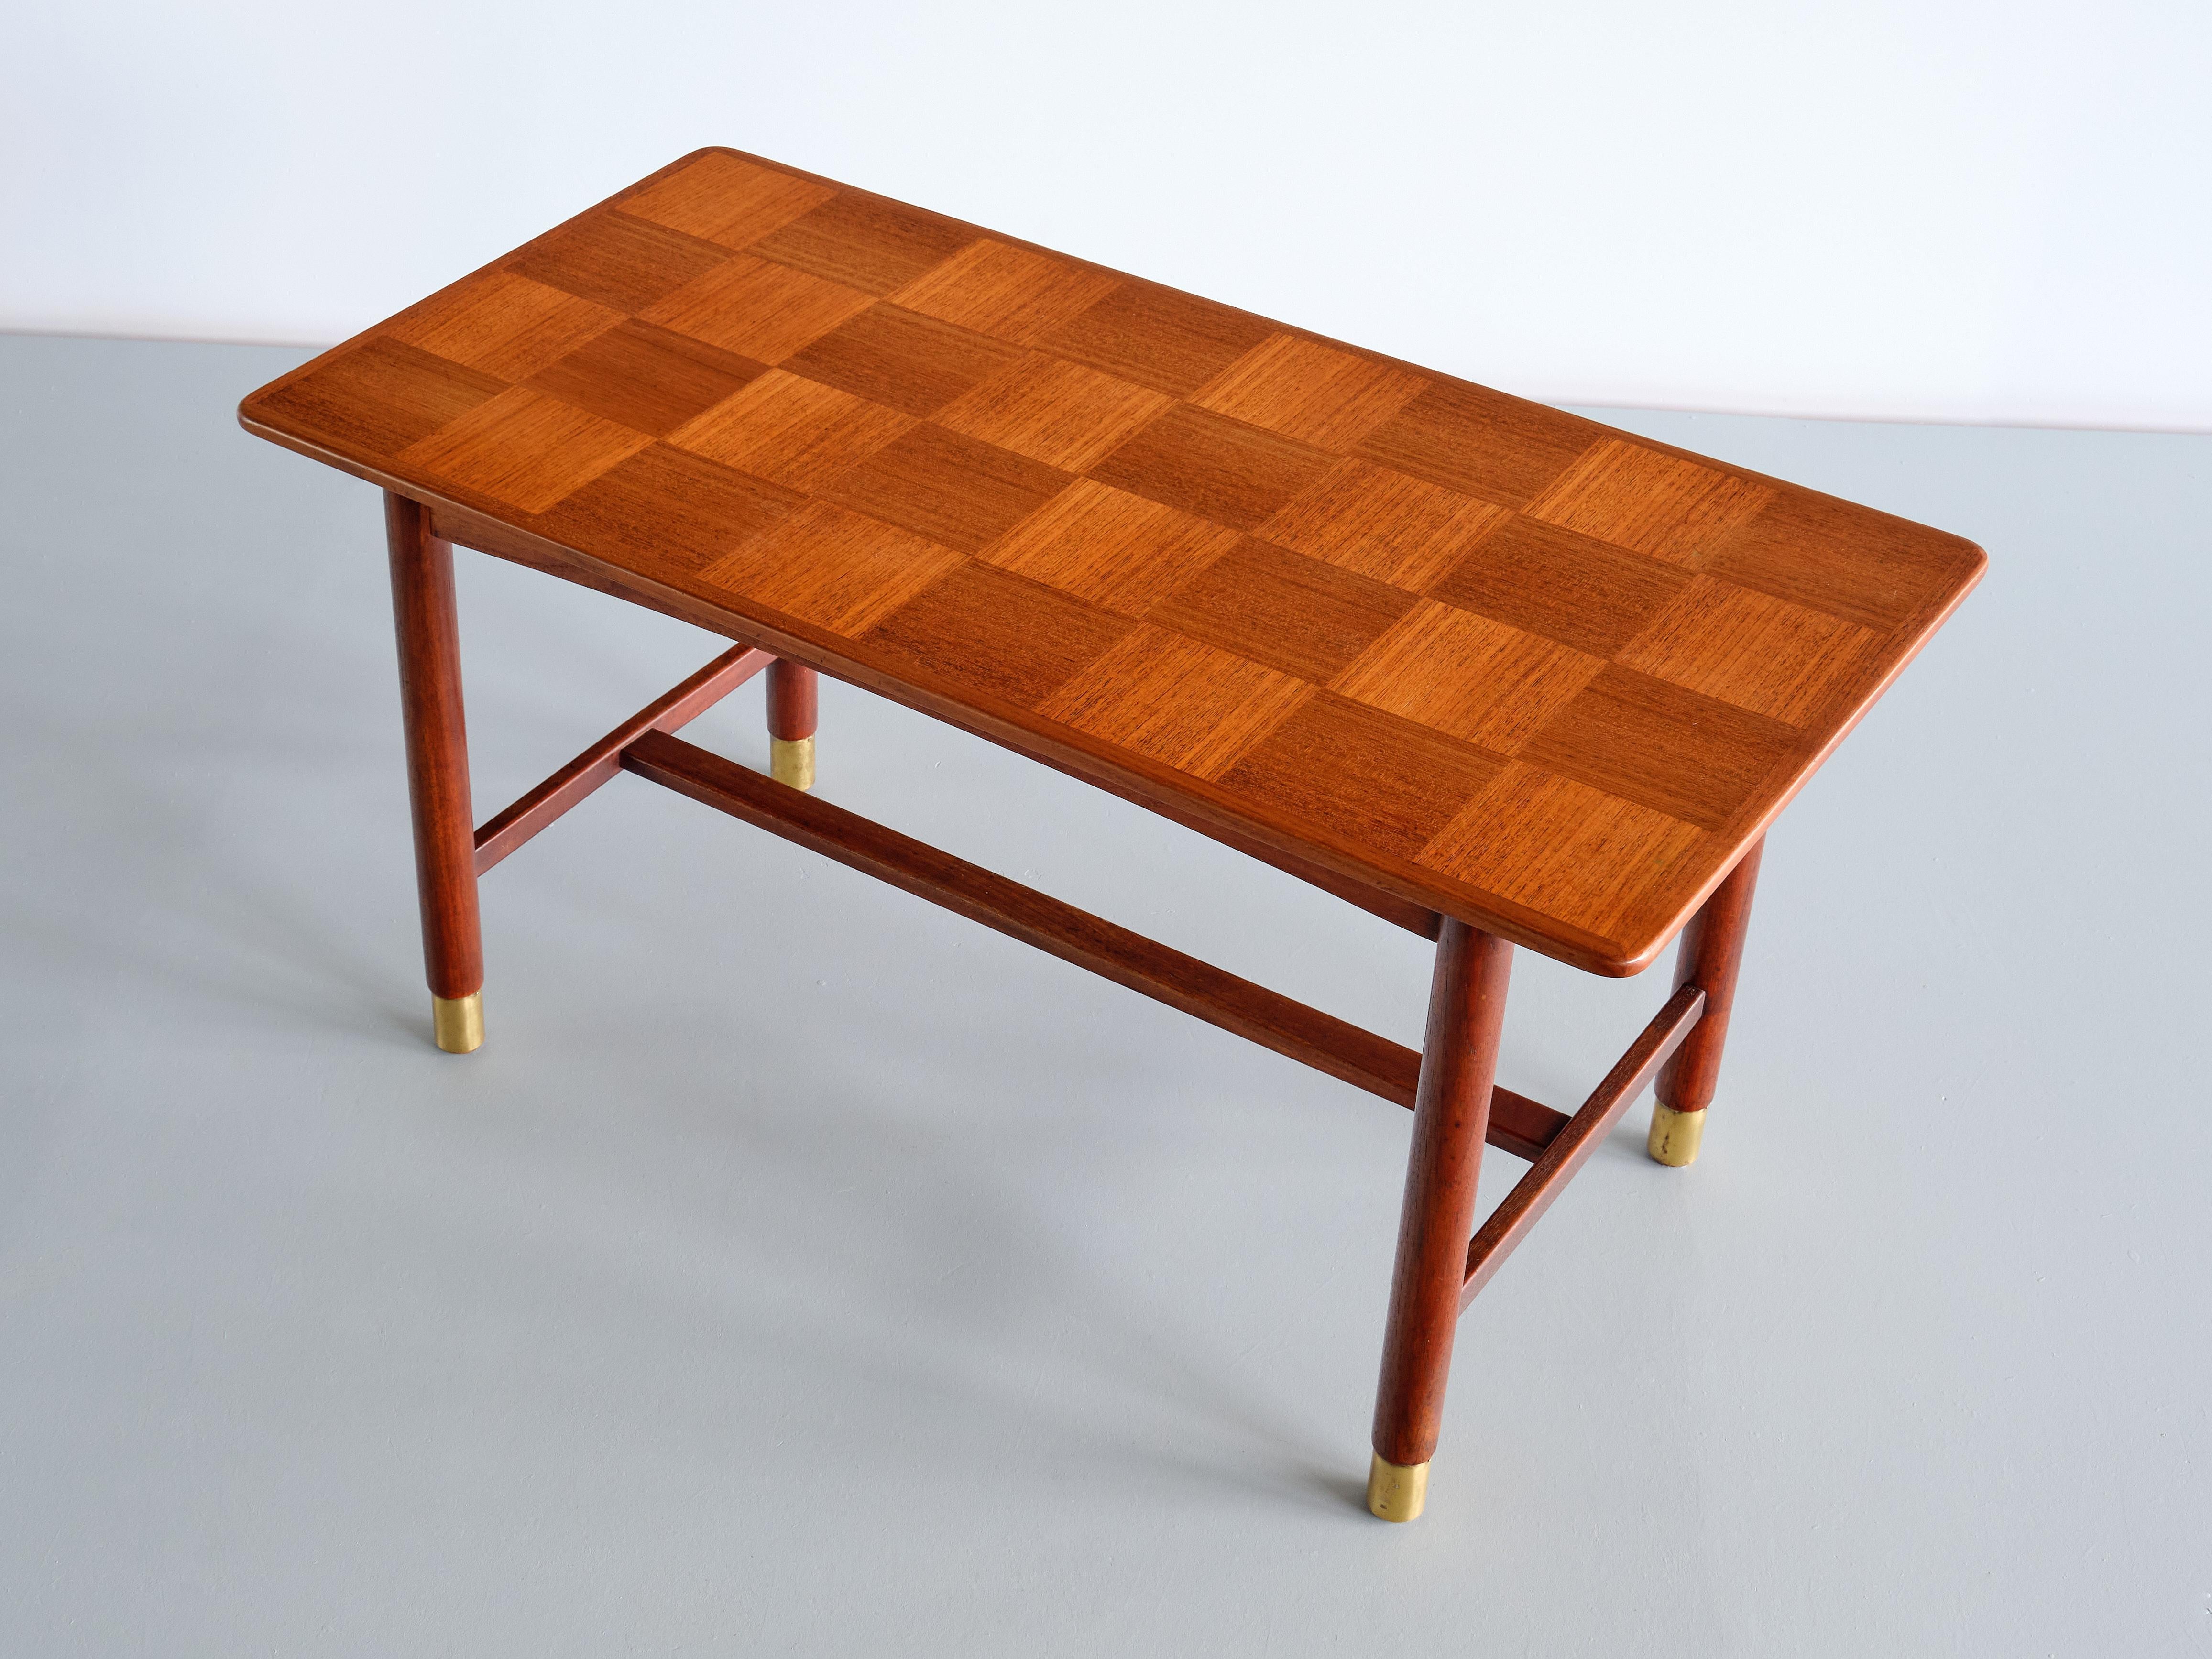 Carl Axel Acking Coffee Table in Teak and Brass, SMF Bodafors, Sweden, 1950s For Sale 2